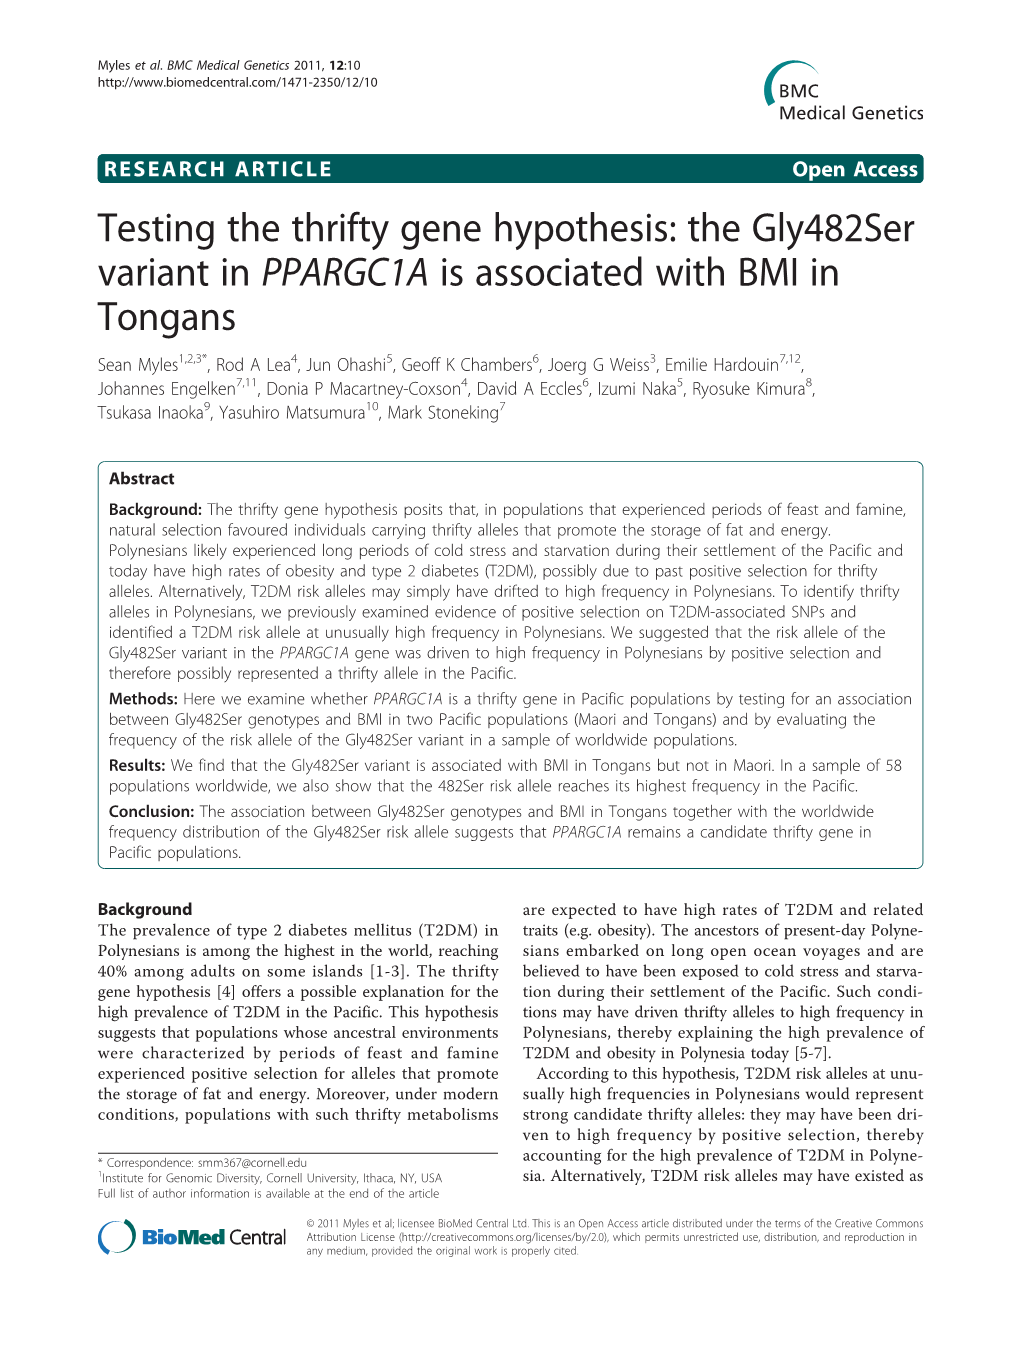 Testing the Thrifty Gene Hypothesis: the Gly482ser Variant in PPARGC1A